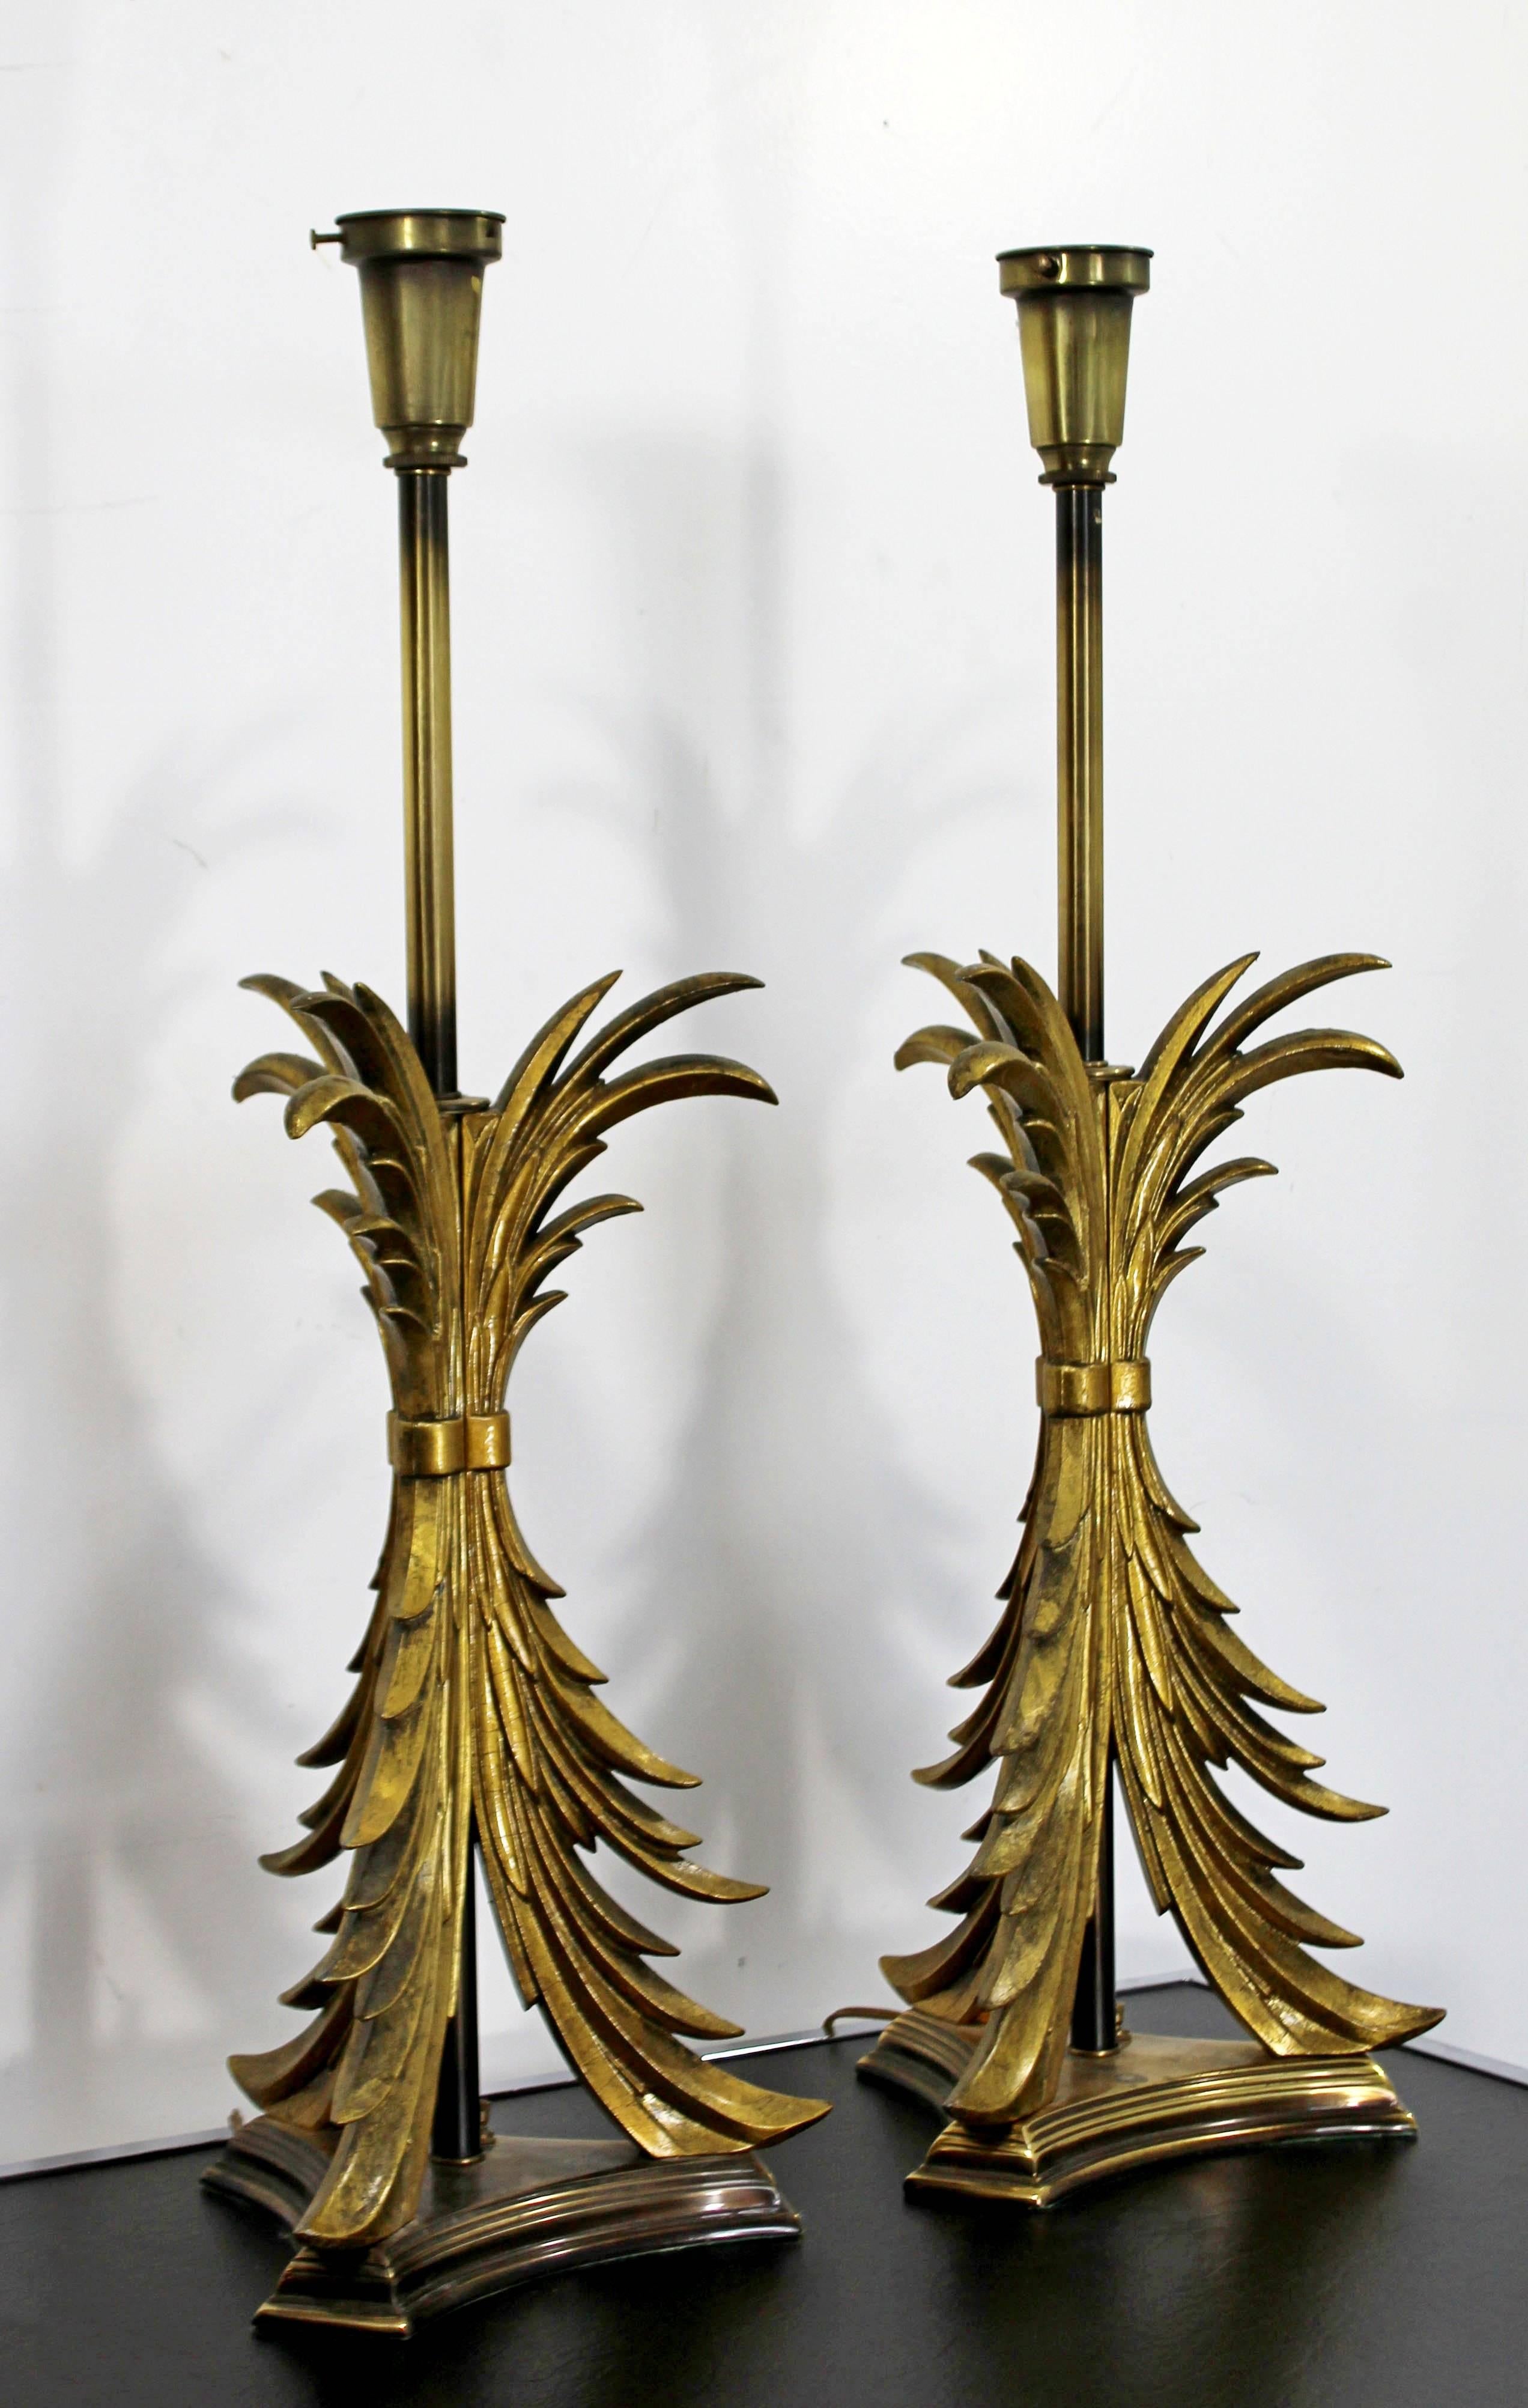 American Hollywood Regency Pair of Solid Brass Ornate Chapman Table Lamps, 1980s